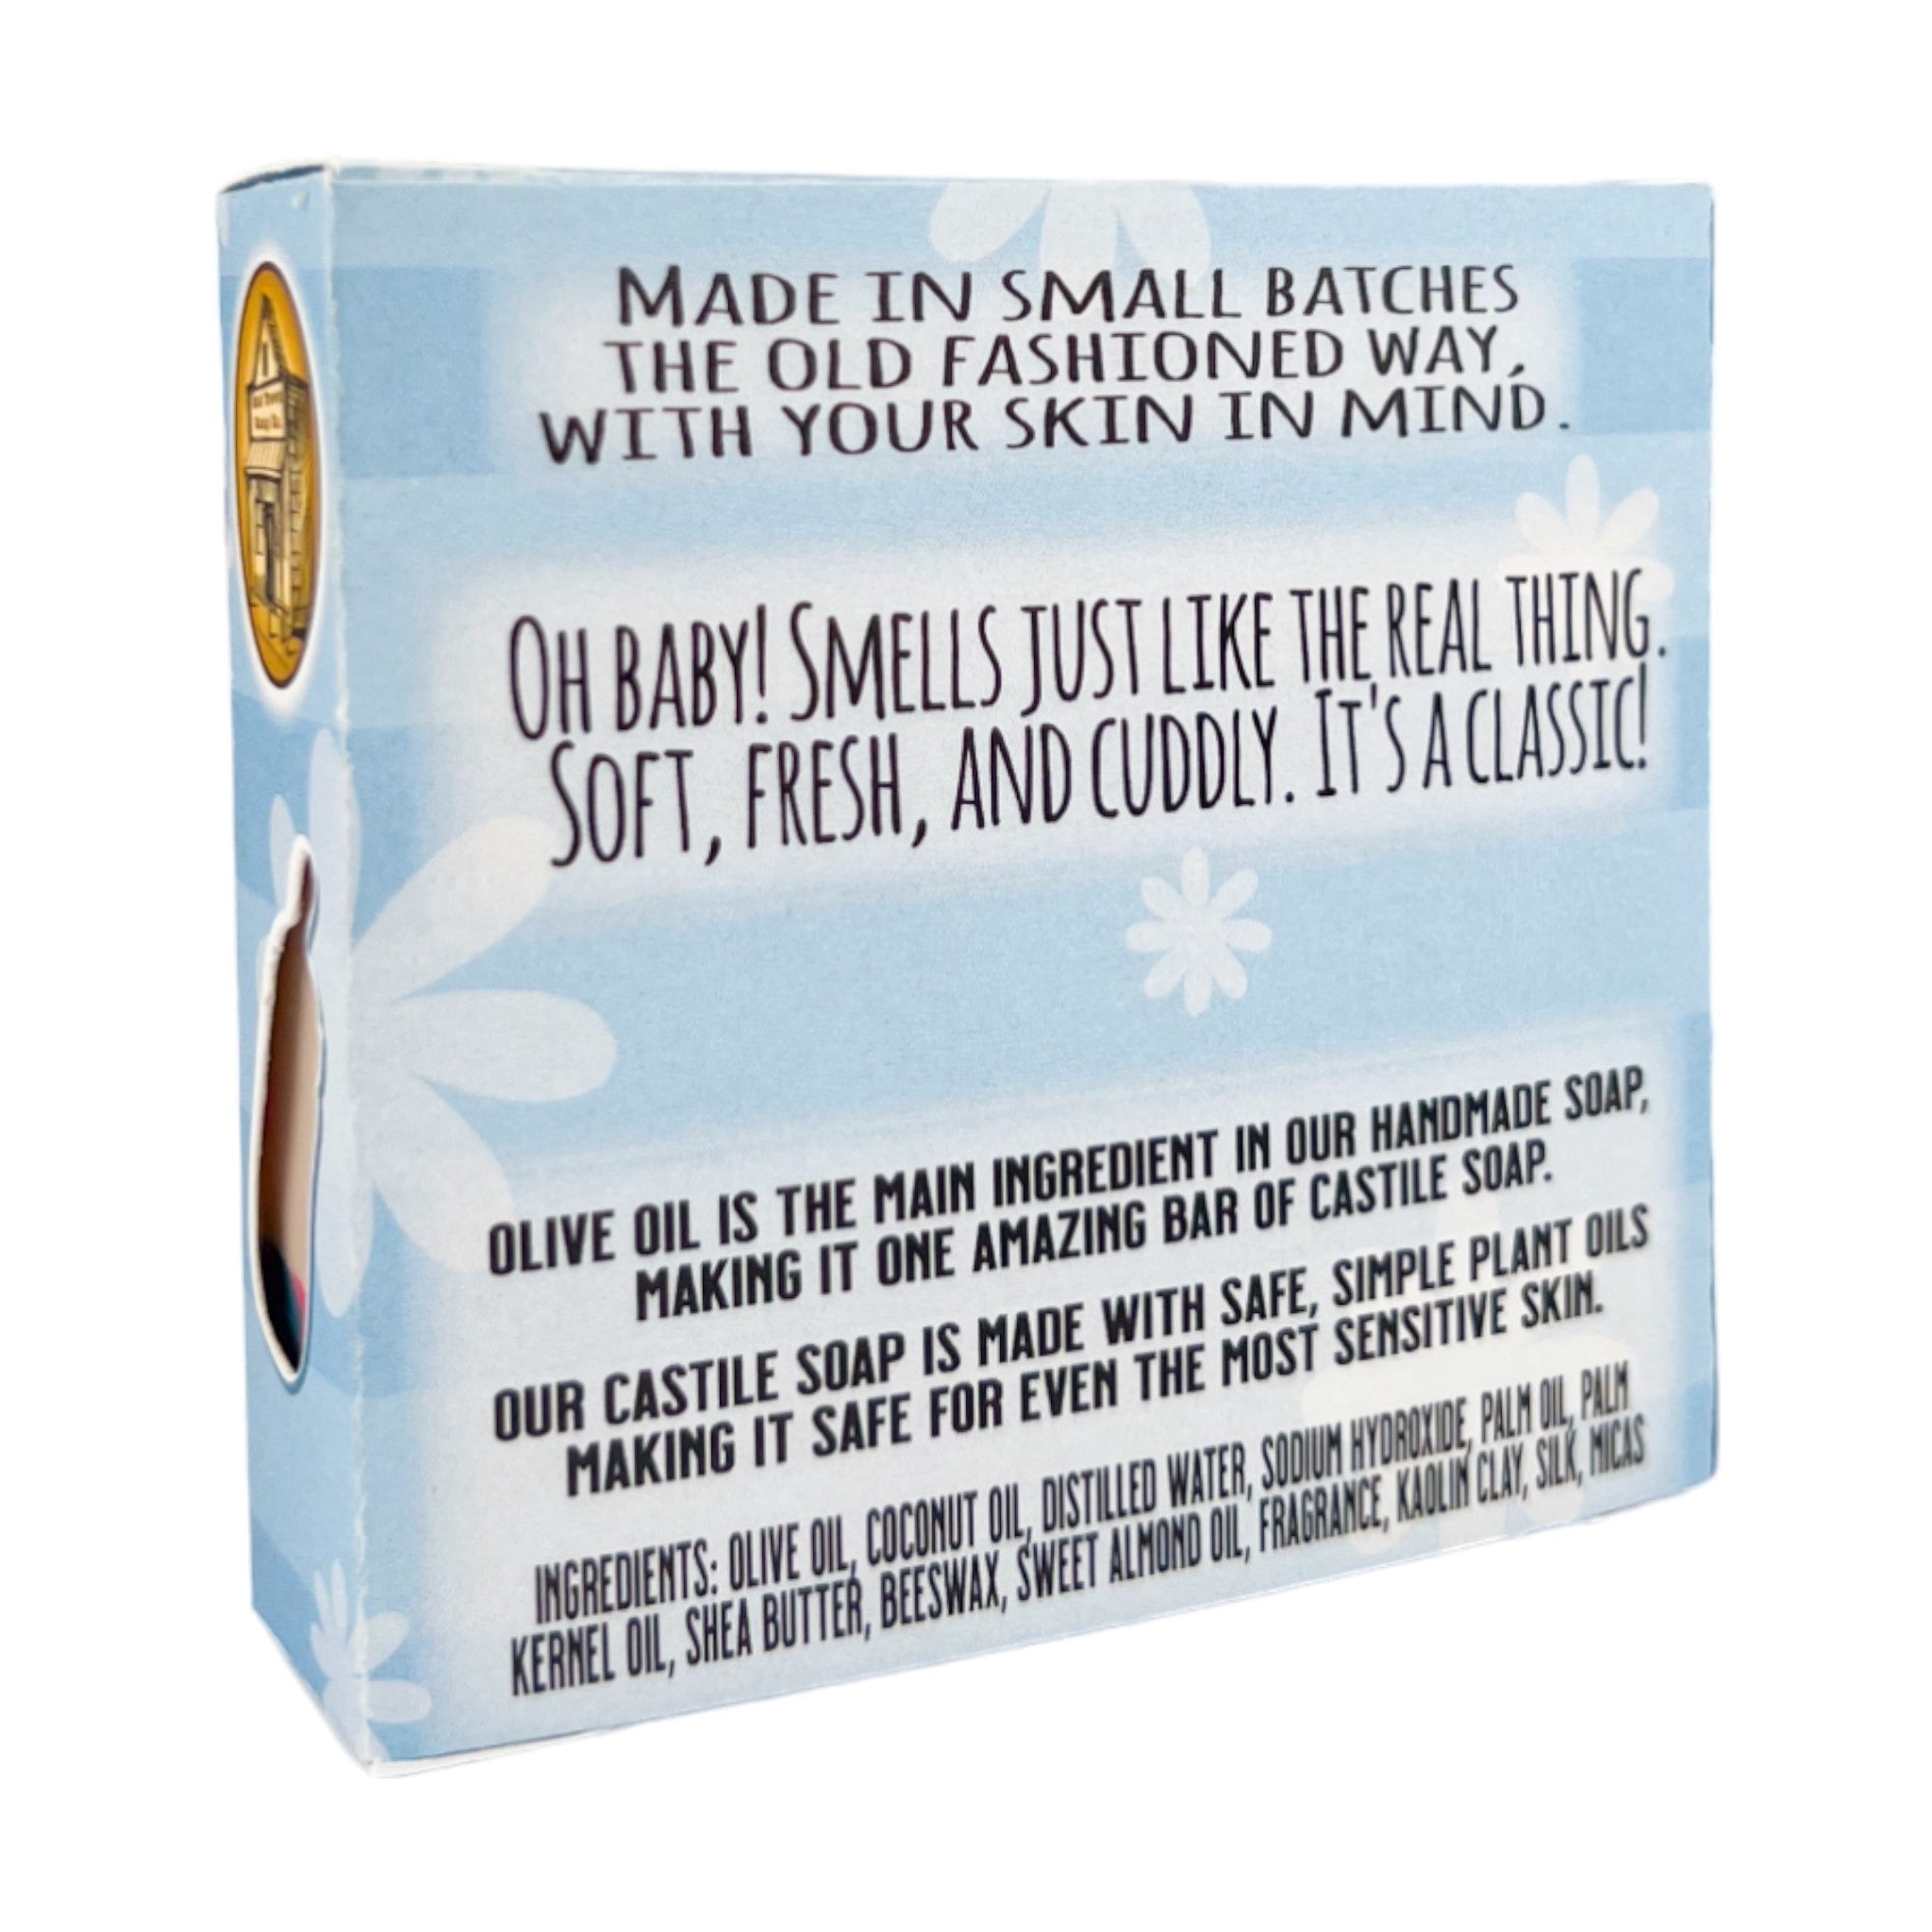 Baby Powder -Bar Soap - Old Town Soap Co.